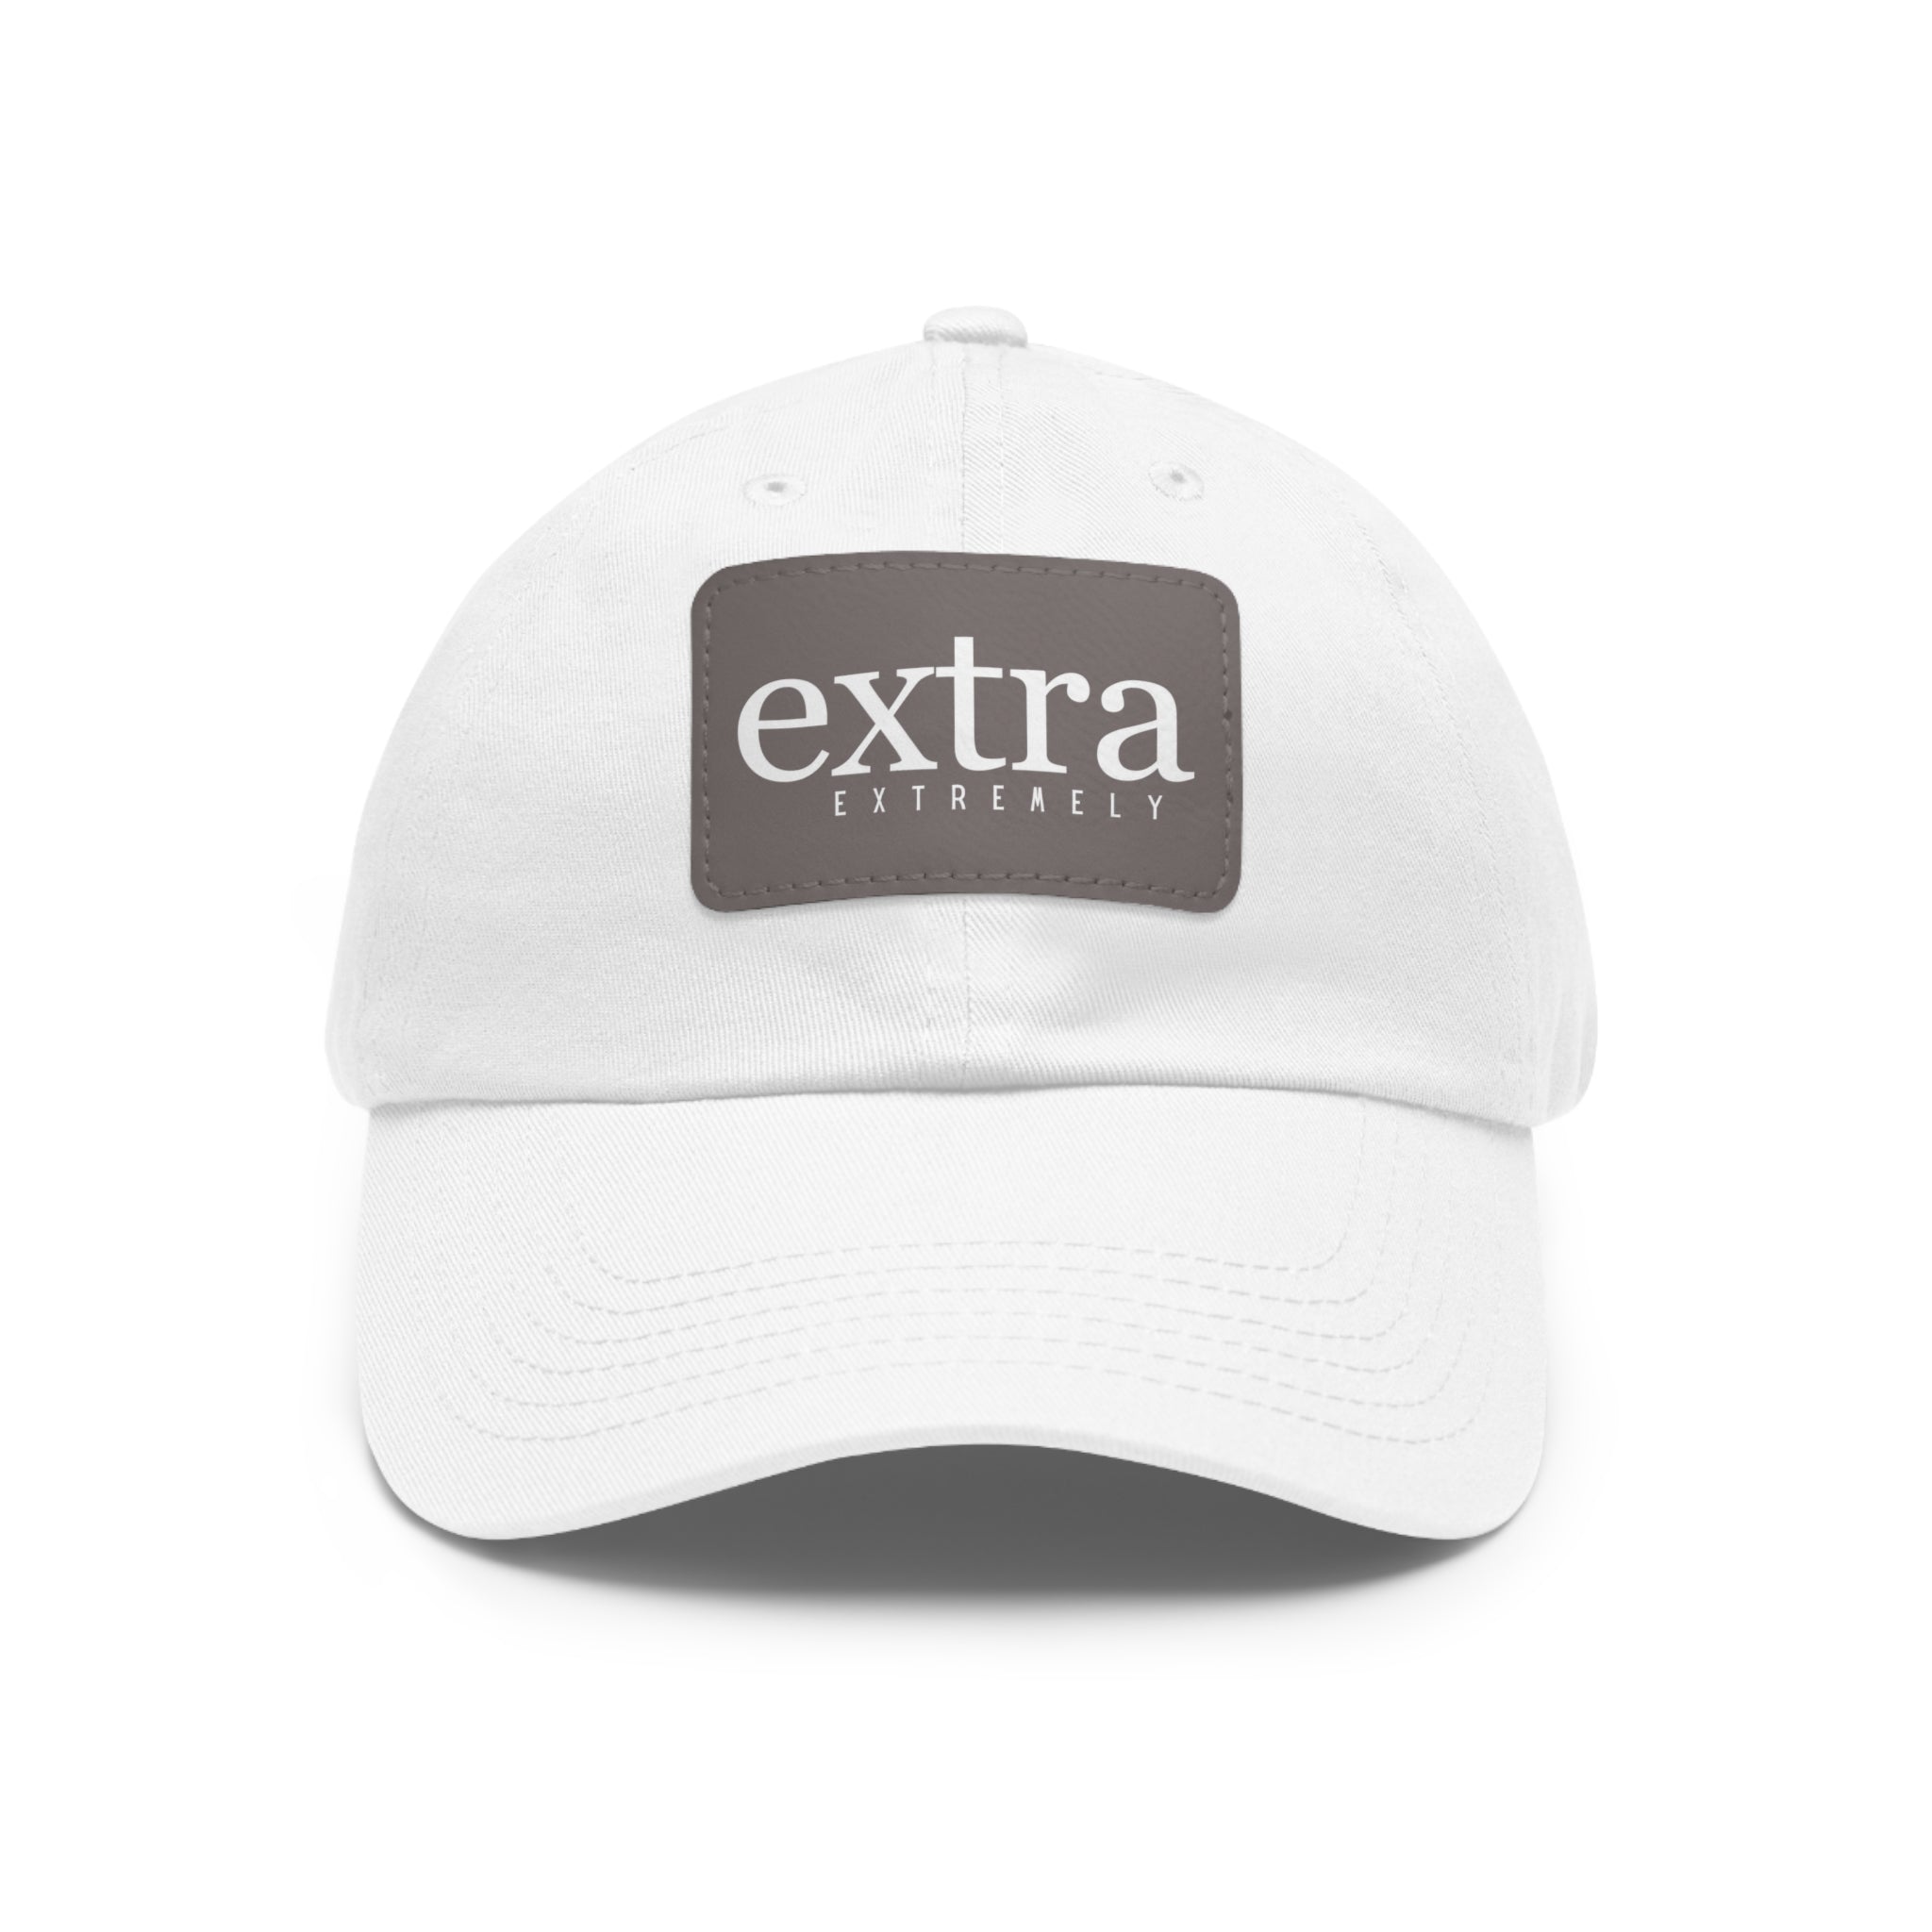 Extremely EXTRA Dad Hat with Leather Patch (Rectangle) Hats WhiteGreypatchRectangleOnesize The Middle Aged Groove